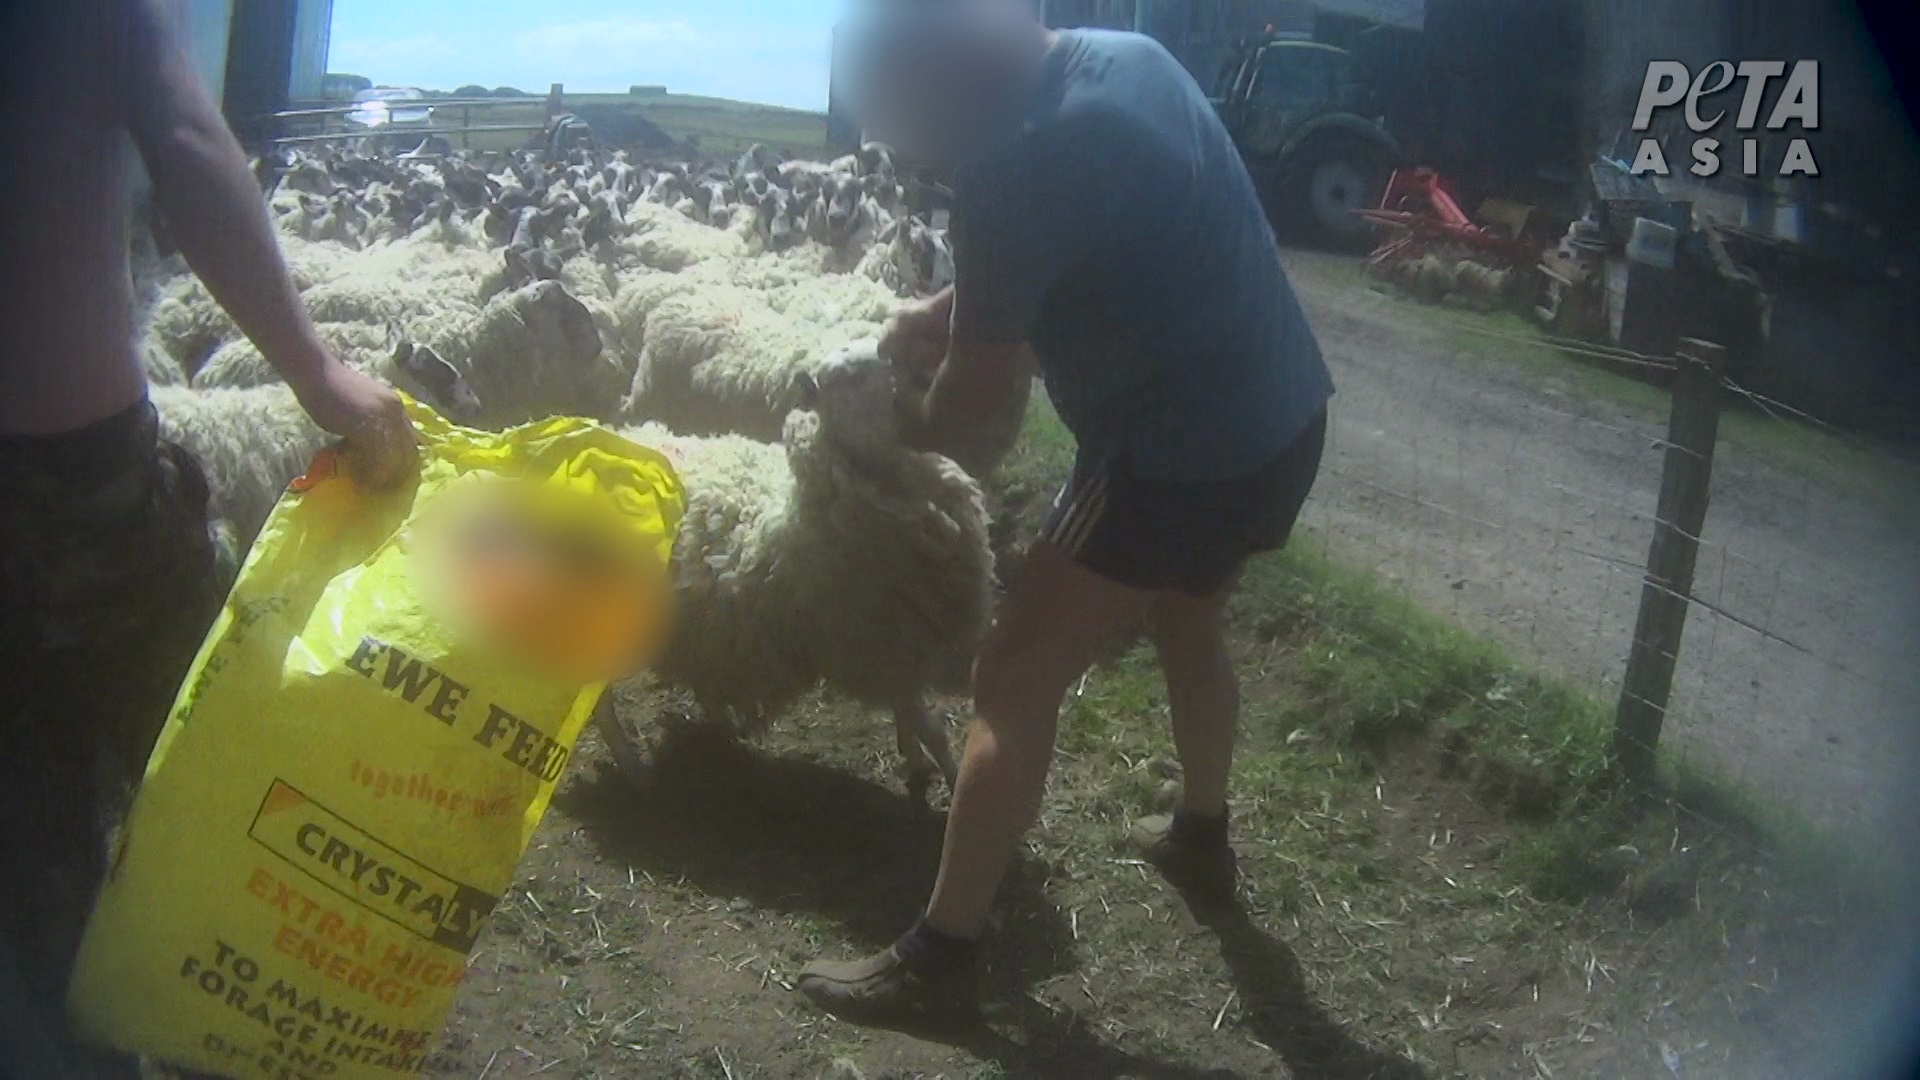 Scottish Sheep Farmer Pleads Guilty After Being Filmed Punching Sheep in the Face